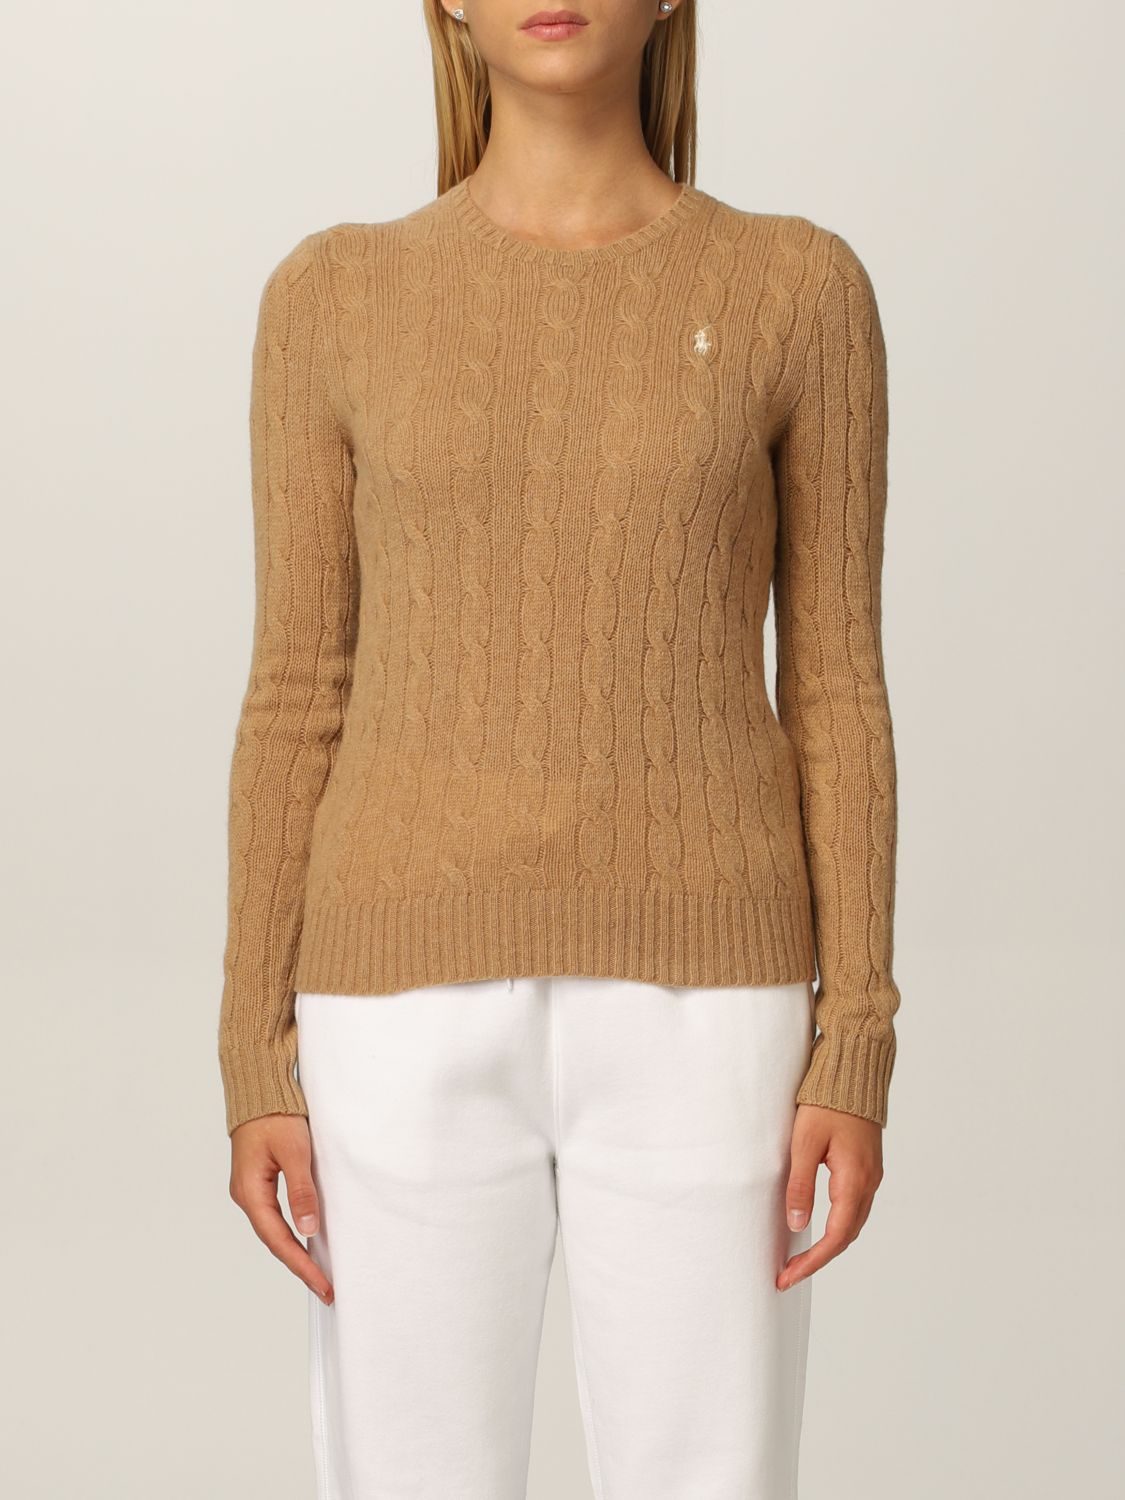 POLO RALPH LAUREN: sweater in cable-knit wool blend - Beige | Polo Ralph  Lauren sweater 211525764 online on 